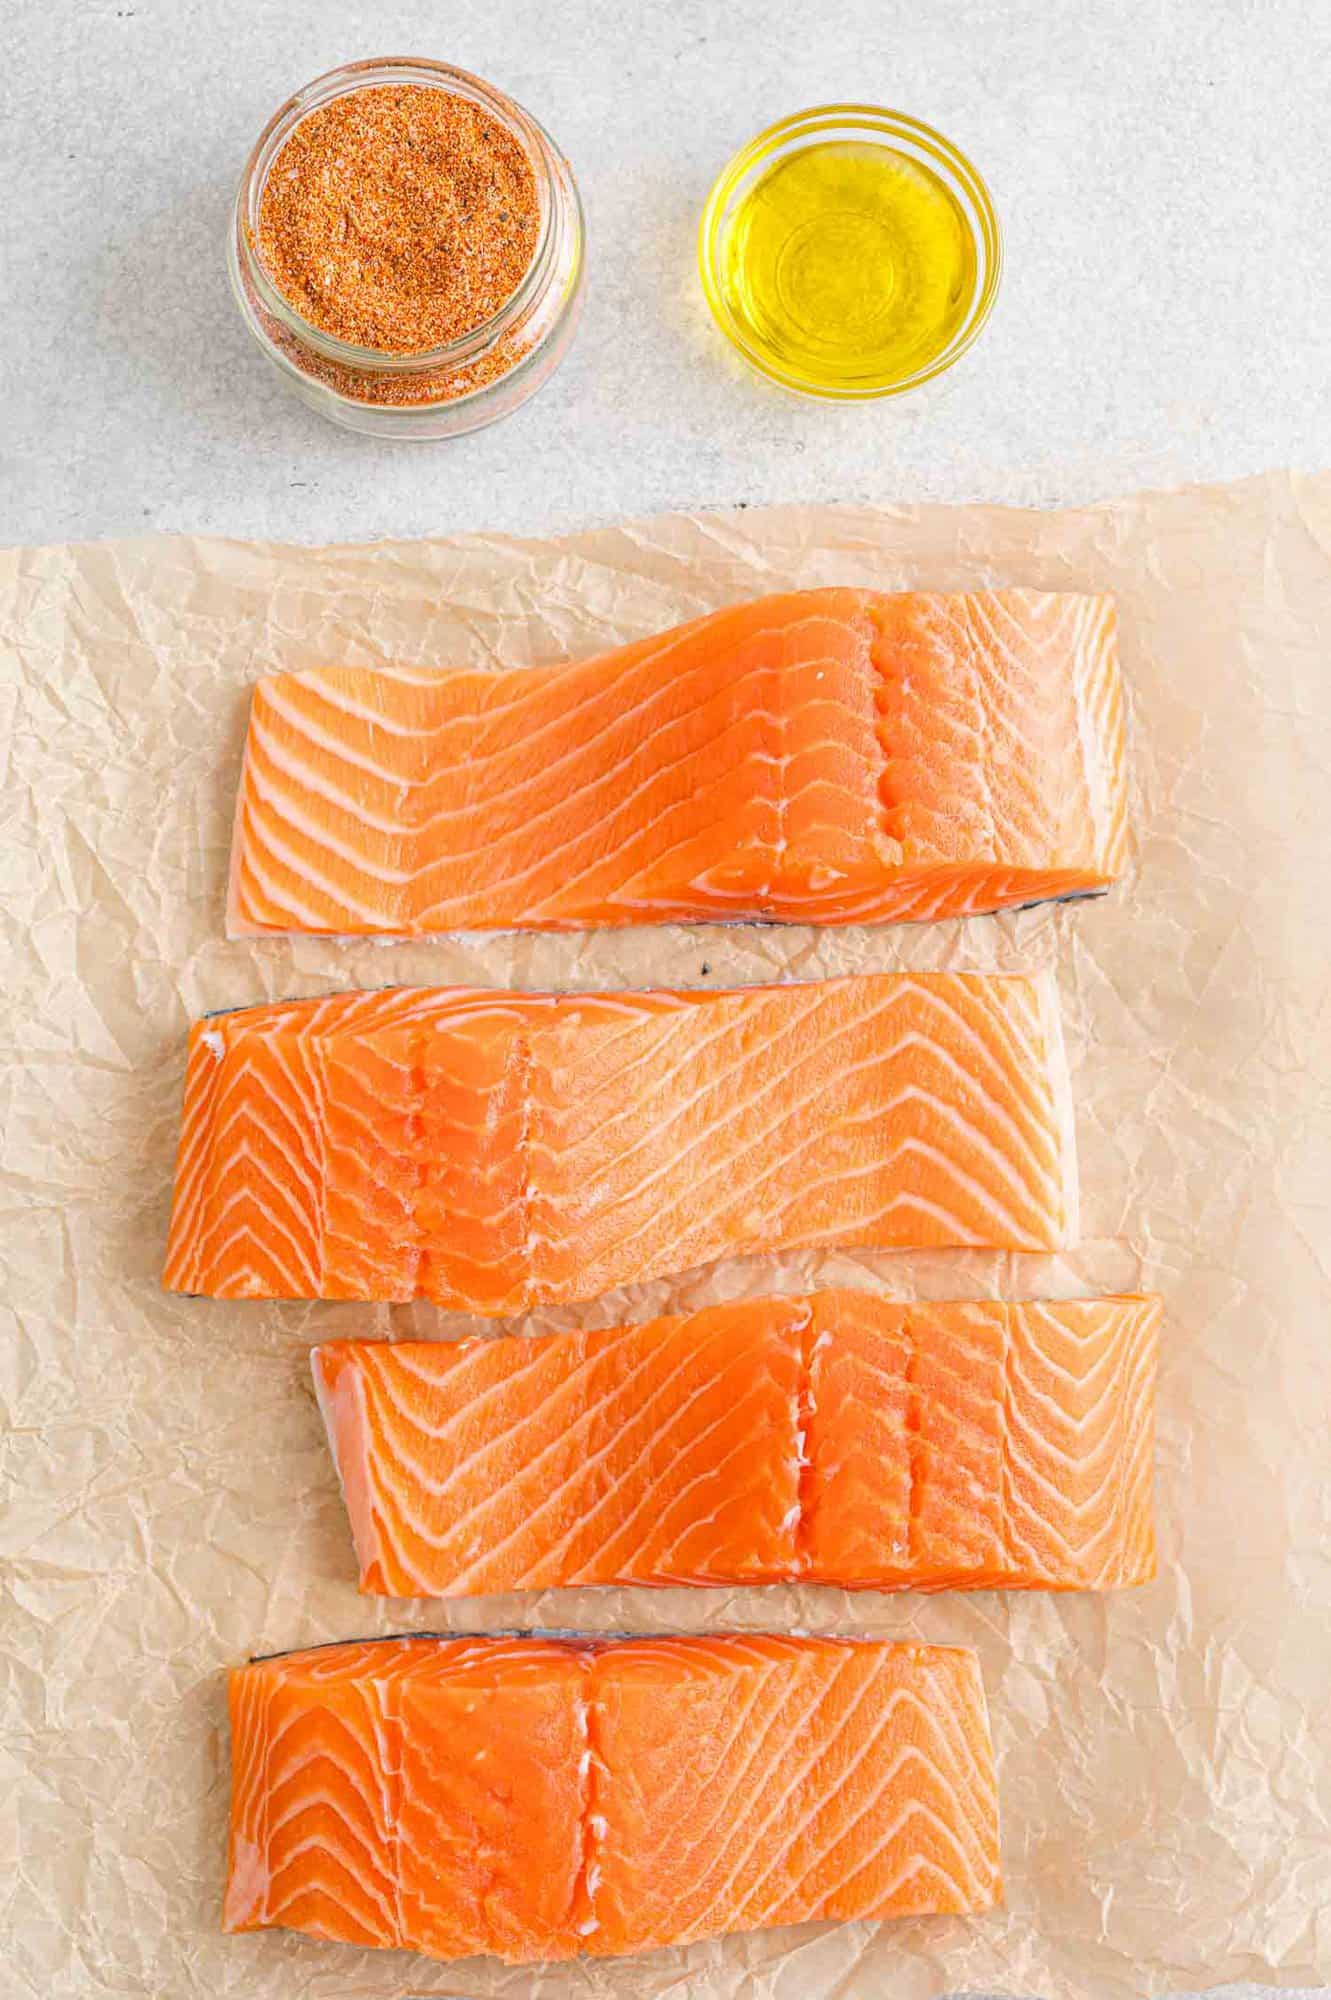 Four salmon filets on a sheet of parchment paper next to small bowls of olive oil and salmon seasoning.